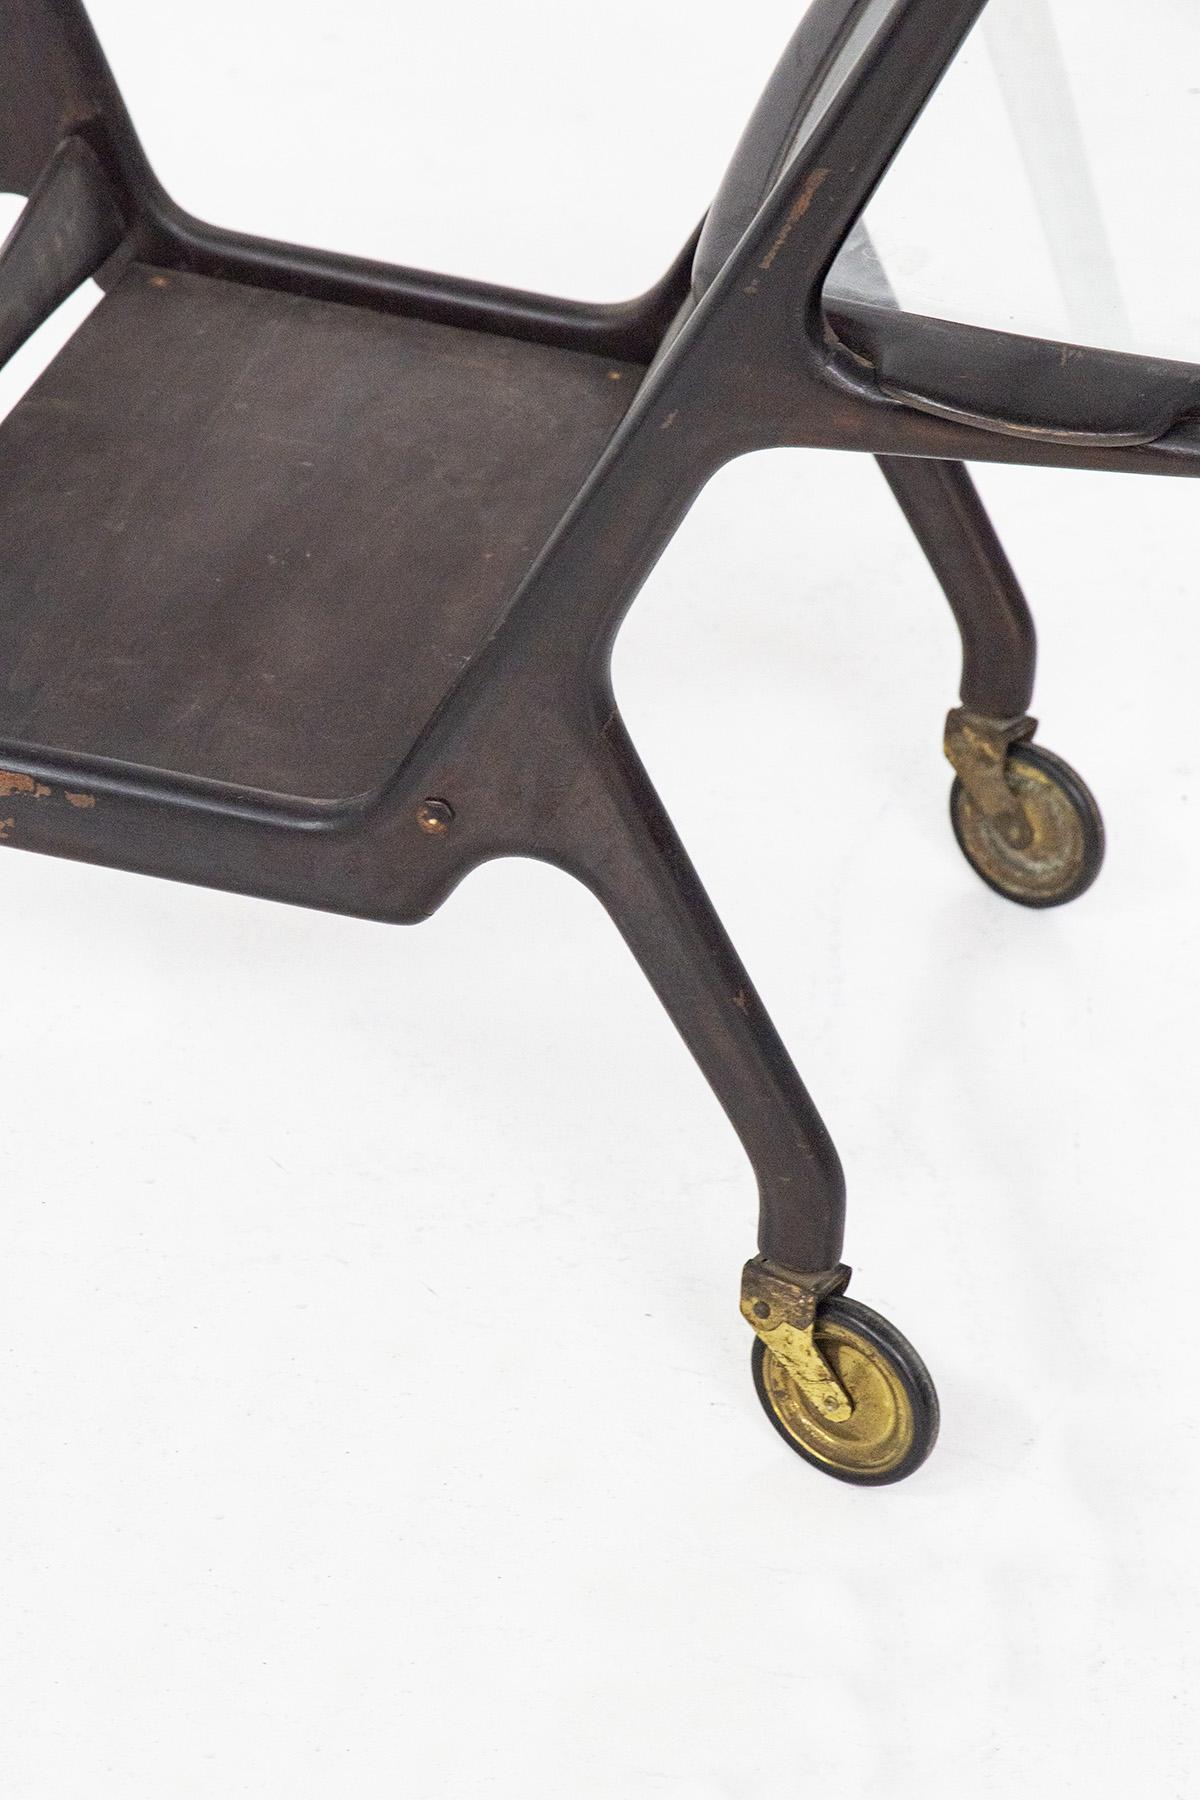 Lacquered Ico Parisi Mid-Century Wood and Glass Trolley for De Baggis